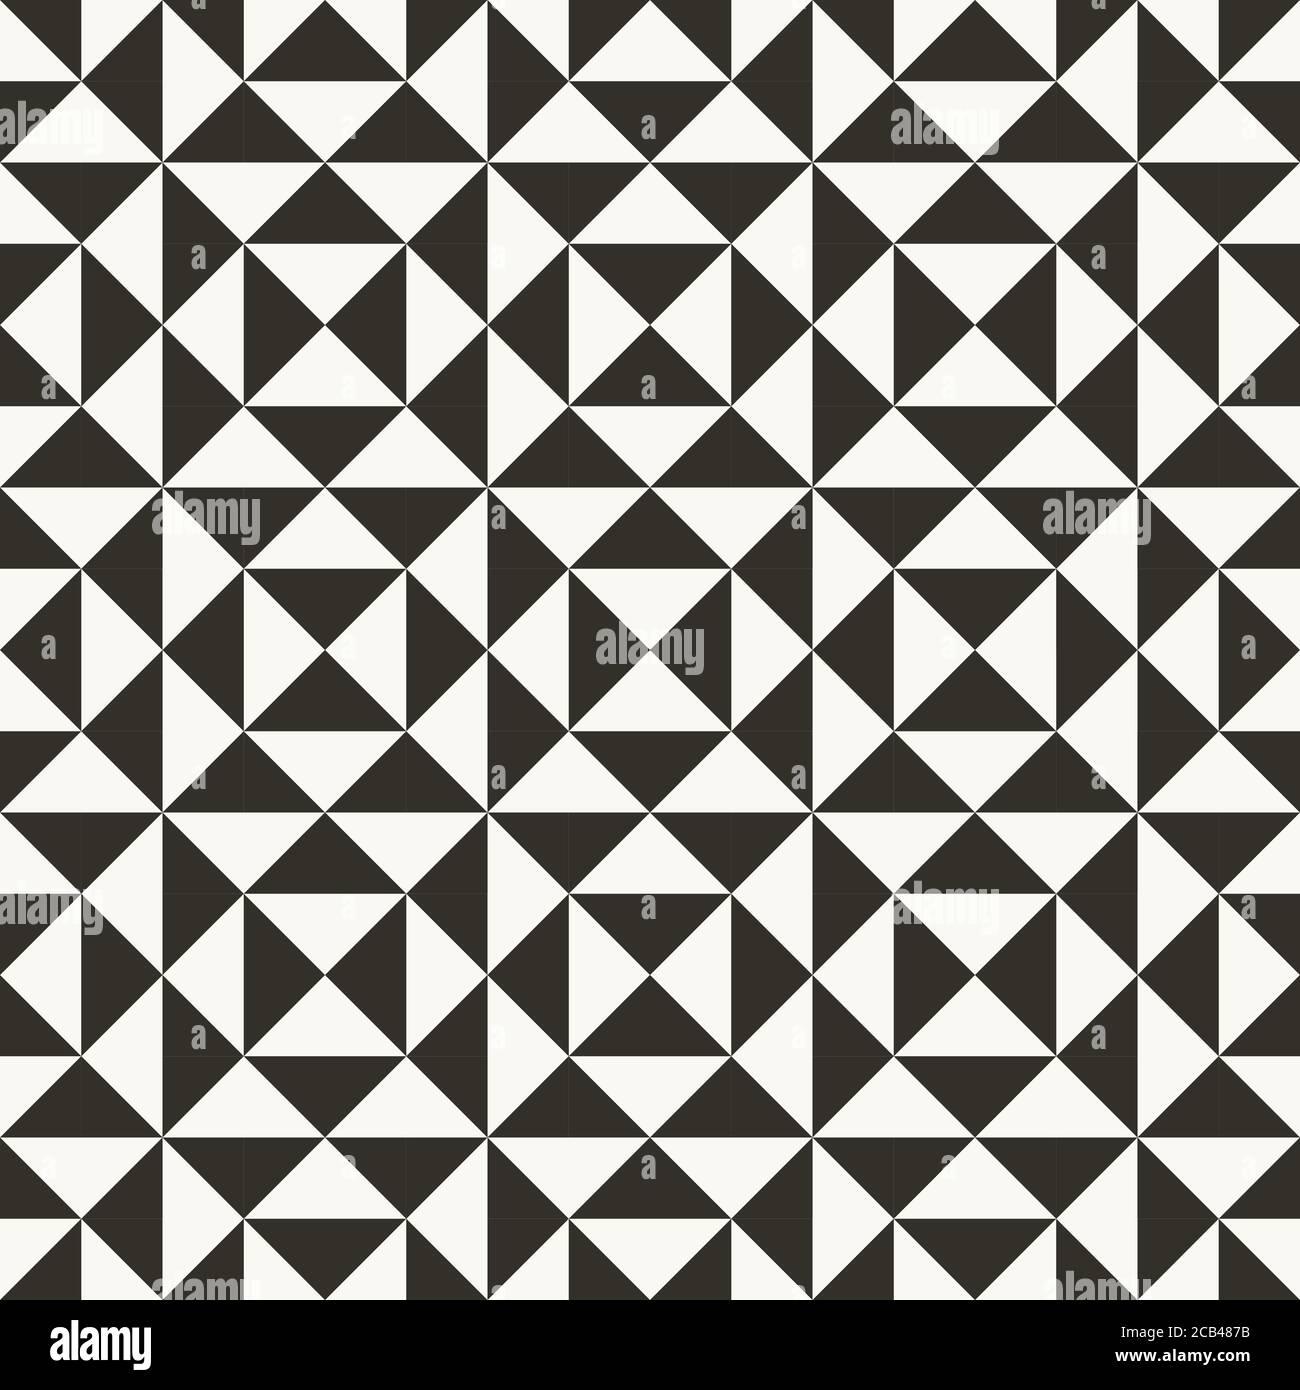 simple black and white geometric patterns